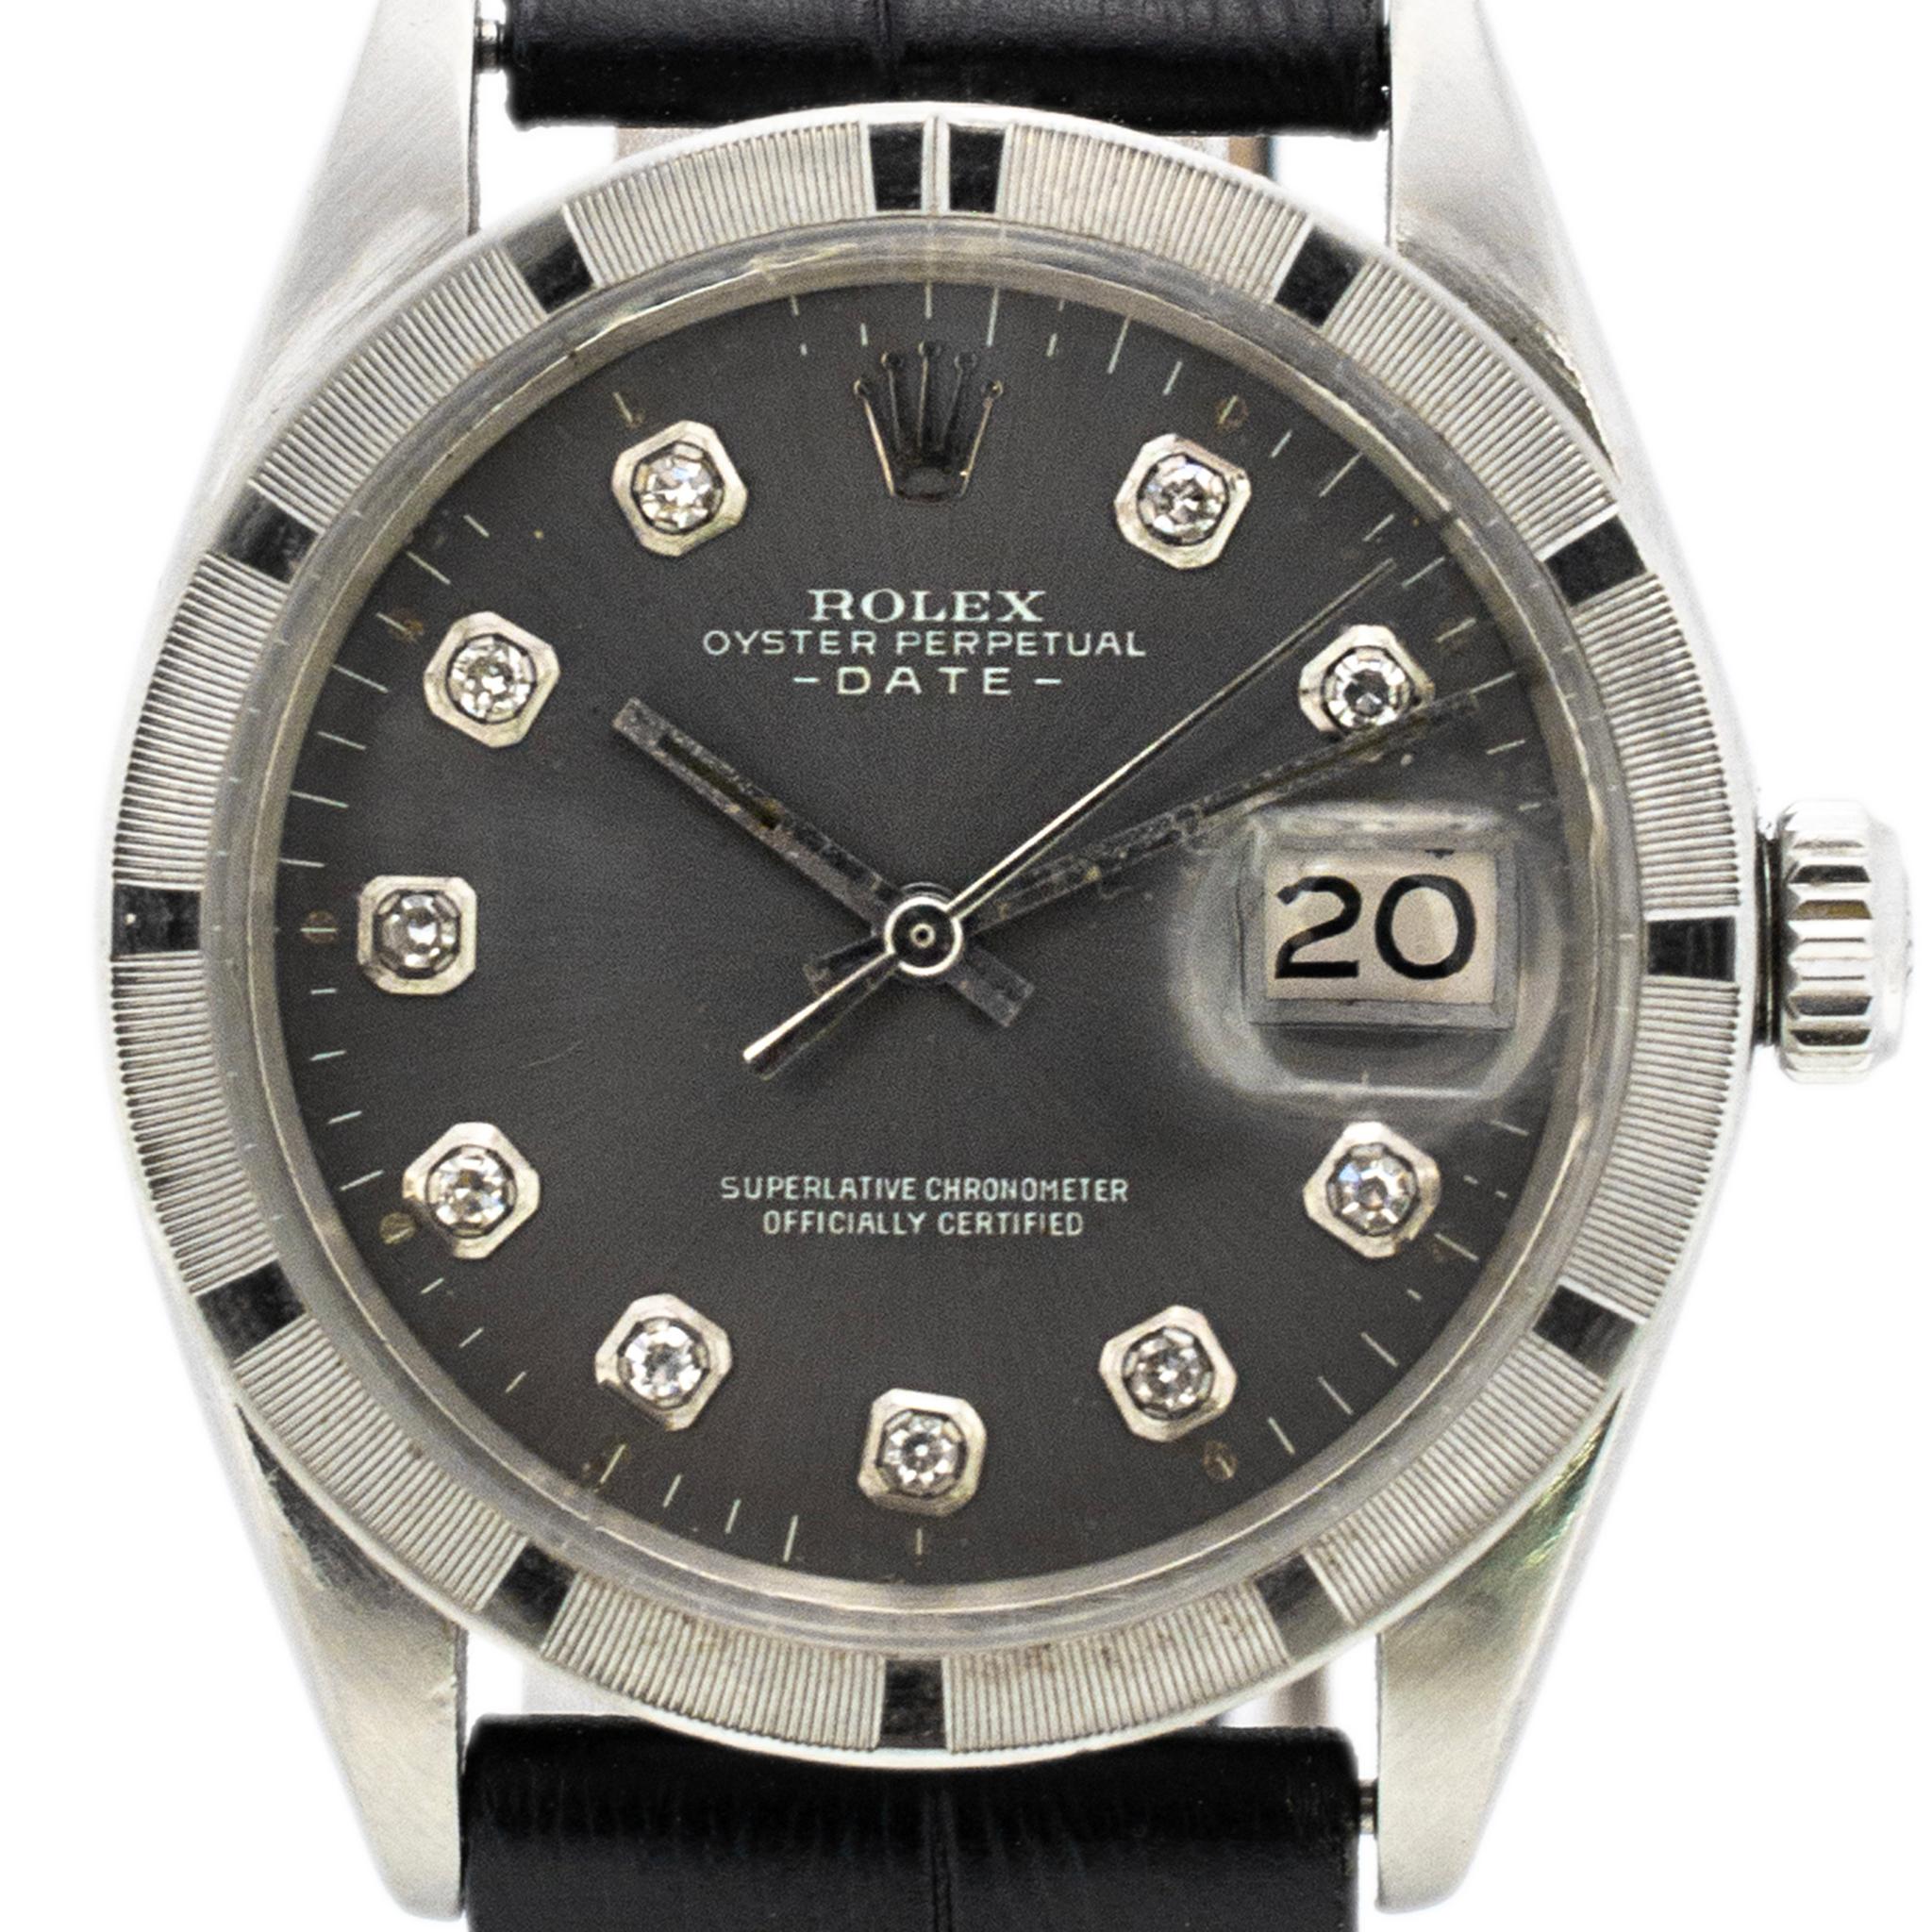 Brand: Rolex

Gender: Mens

Material: Stainless Steel

Band Width: 18.5mm

Band Length: 7.50 inches 

Weight: 49.10

Gent's stainless steel ROLEX Swiss made watch with original box. The 